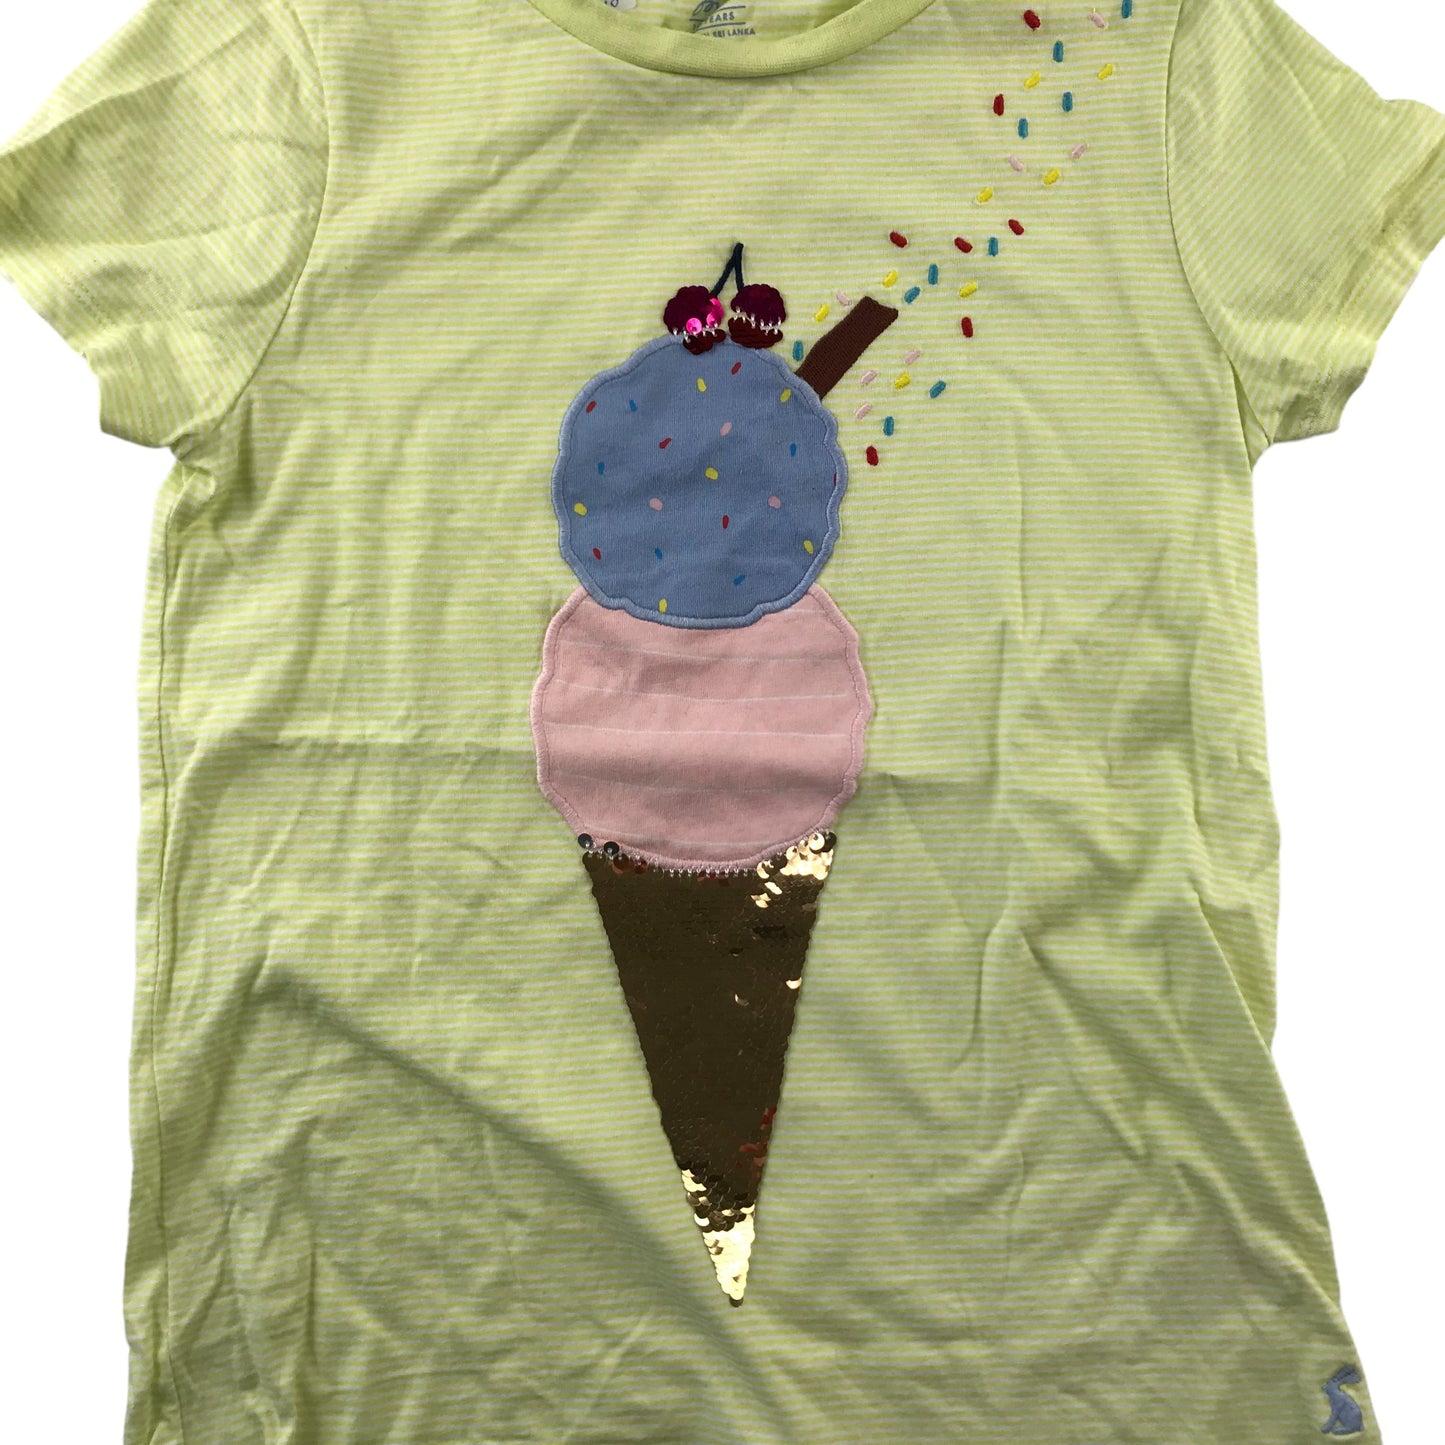 Joules T-Shirt Age 10 Yellow Sequin Ice Cream Design Cotton